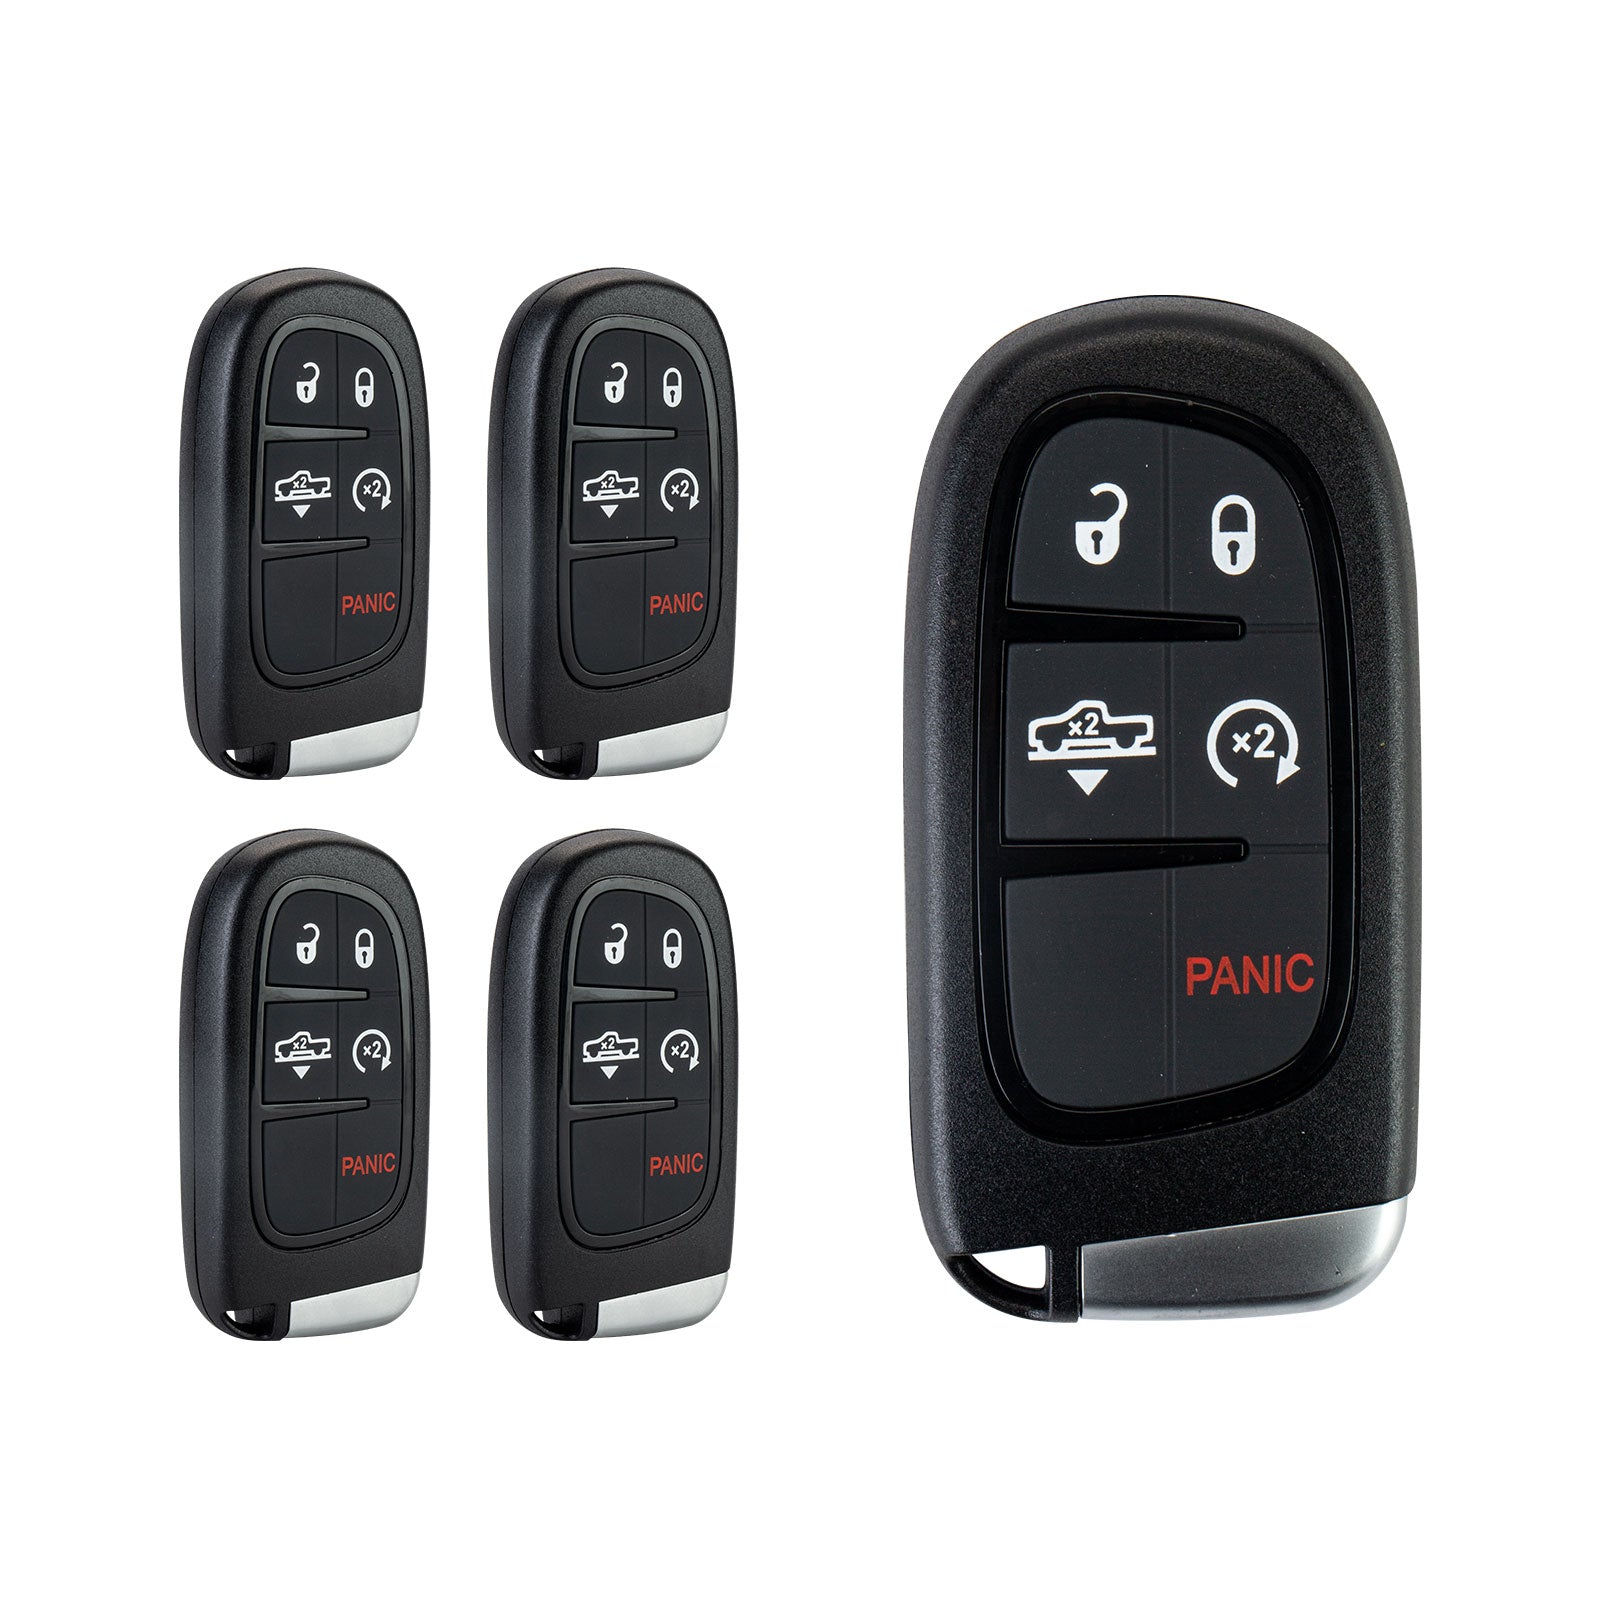 Smart Fob Keyless Entry Control Replacement for 2013-2019 Ram 1500 2500 3500 Air Suspension GQ4-54T 46 CHIP KR-D5RG-05